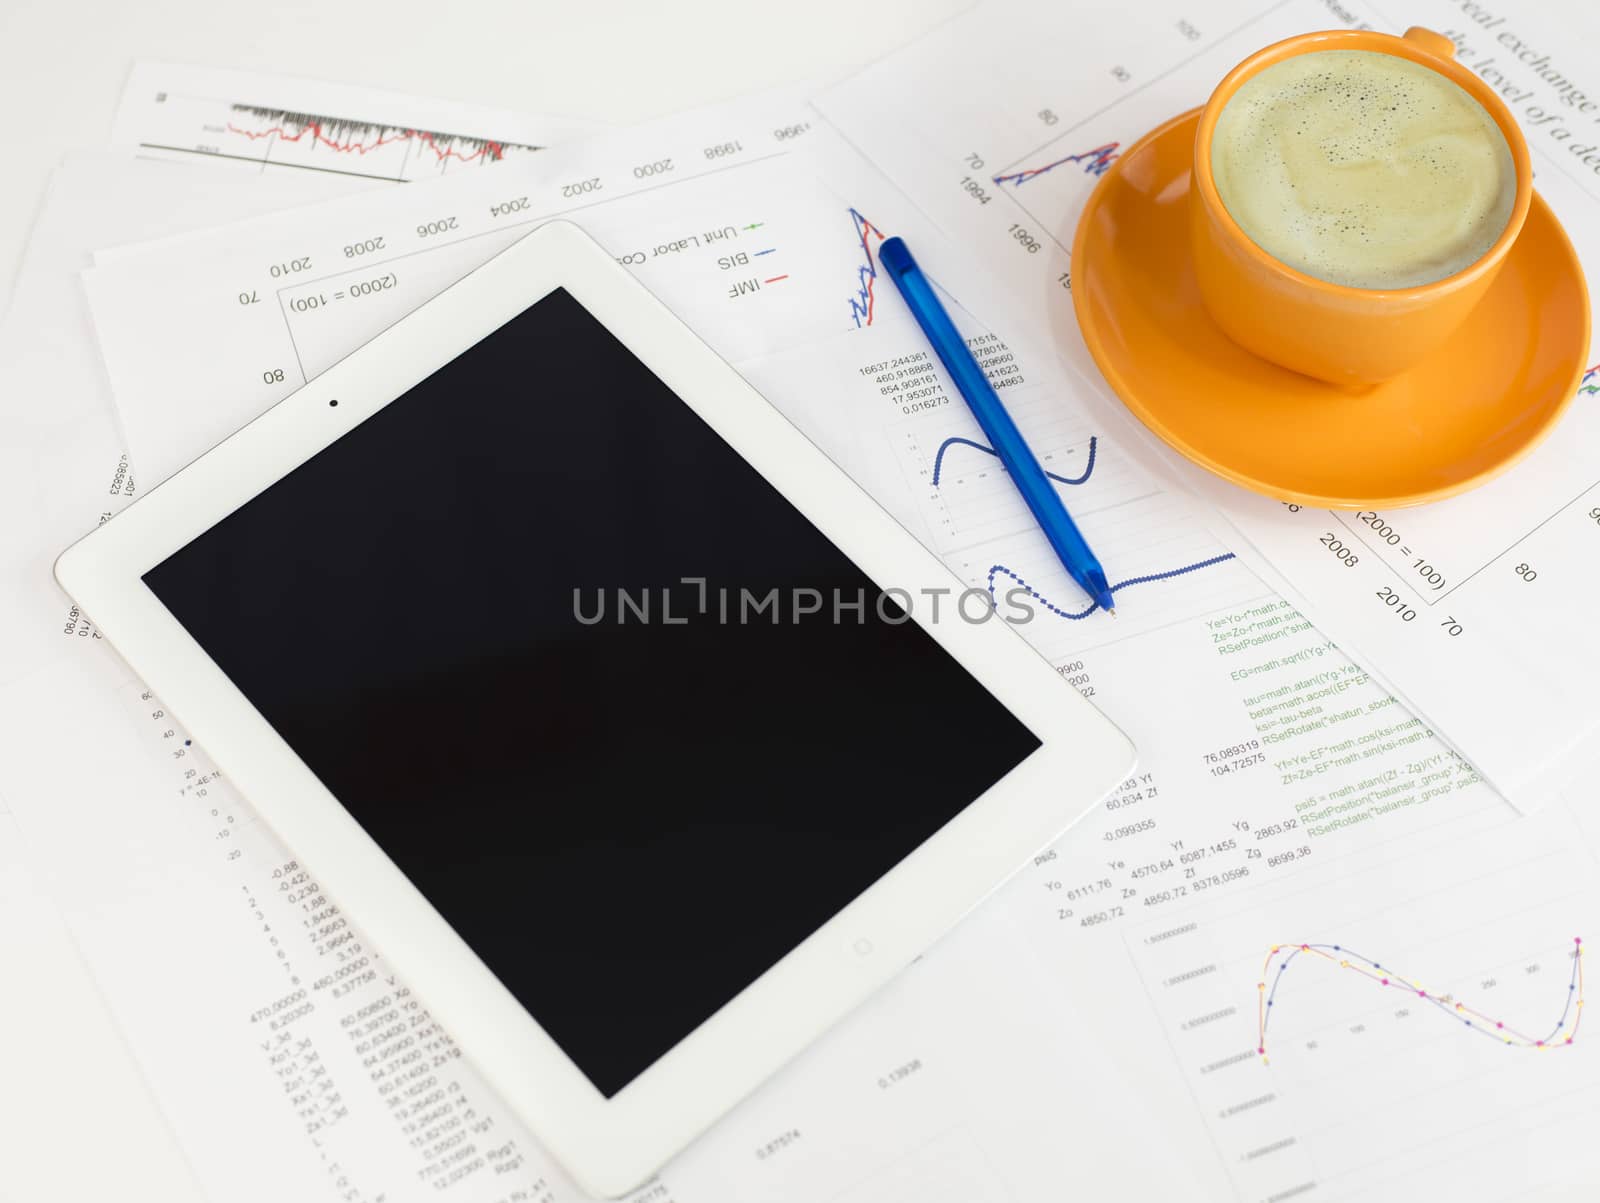 Tablet pc, cup of coffee and paper with graphs. Business concept